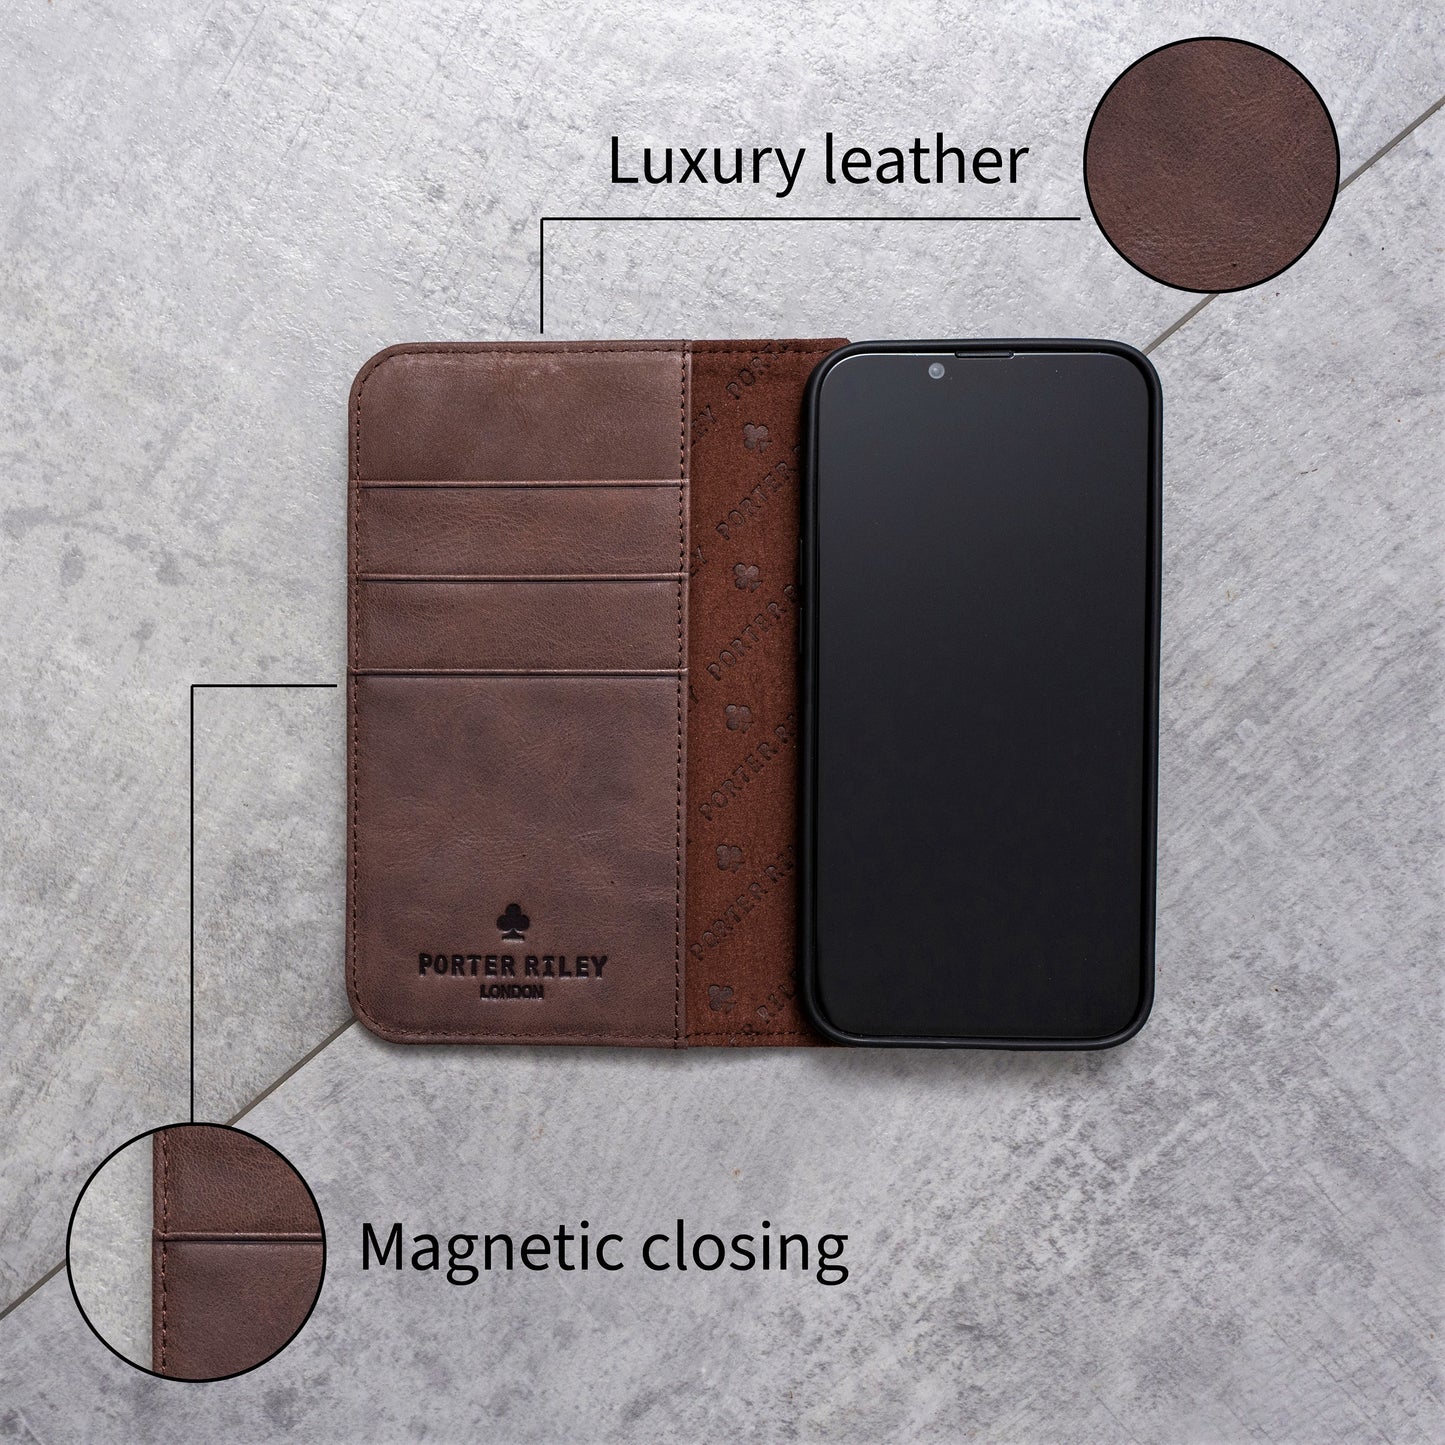 Samsung Galaxy Note 8 Leather Case. Premium Slim Genuine Leather Stand Case/Cover/Wallet (Chocolate Brown)